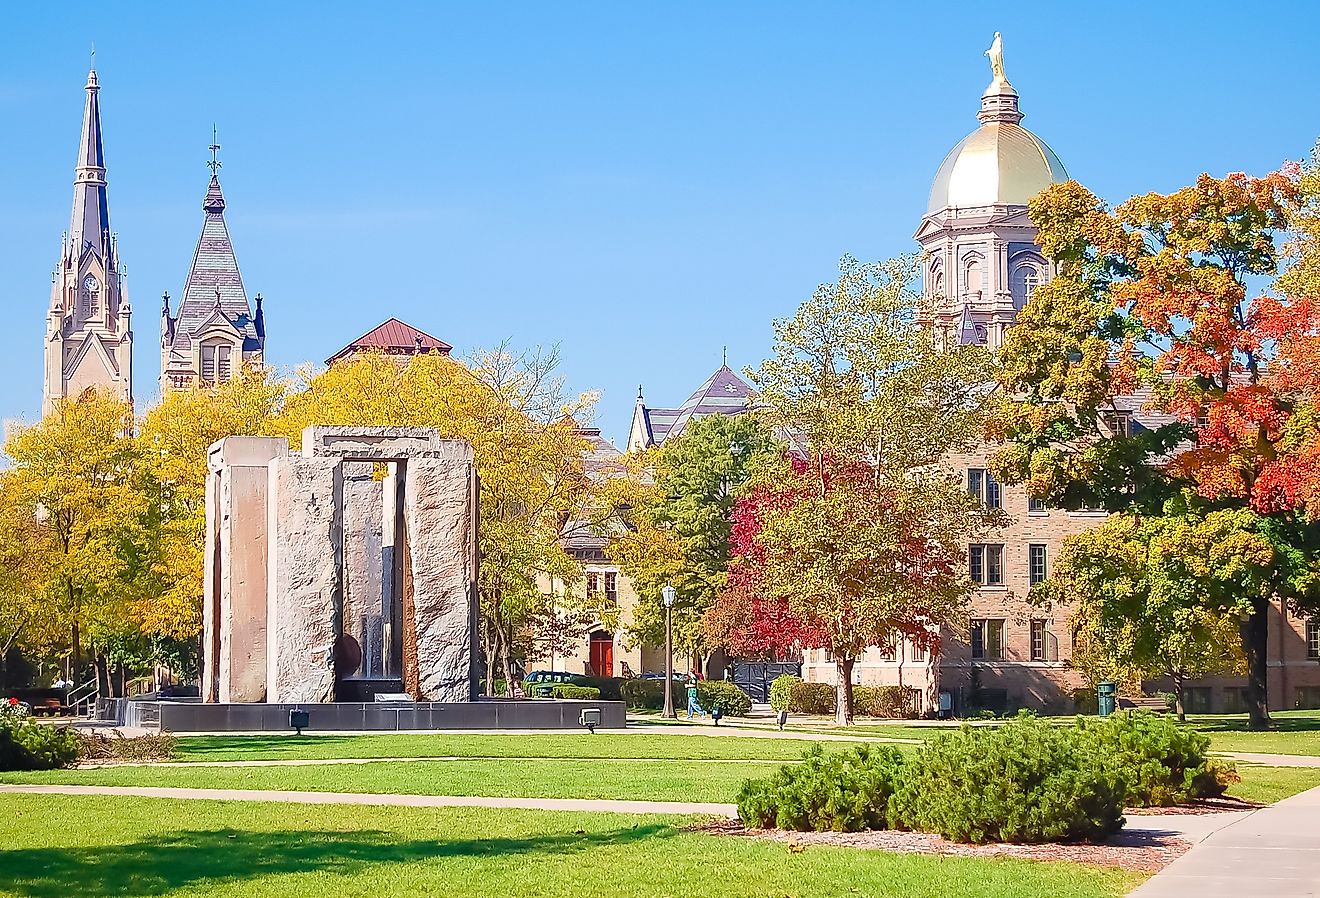 Autumn views of the central campus of the University of Notre Dame. Image credit Chuck W Walker via Shutterstock